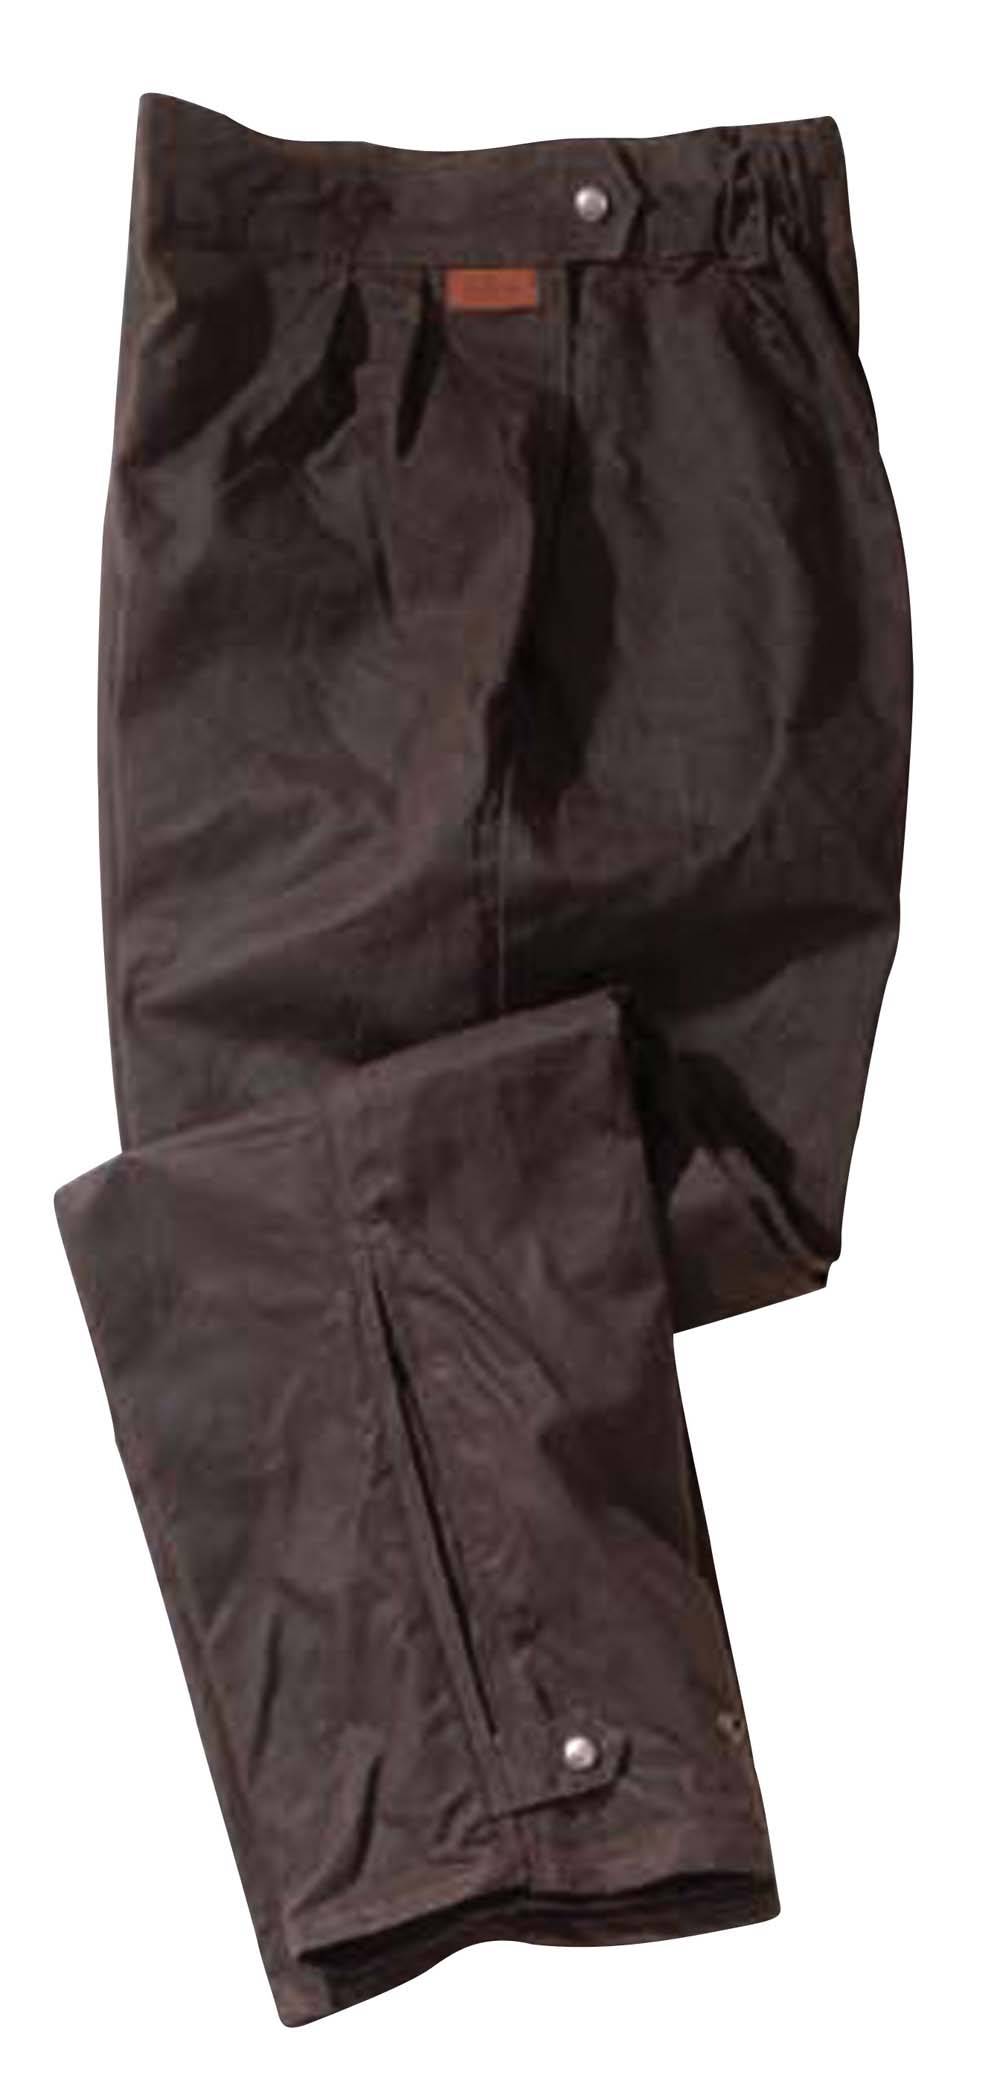 Outback Trading Oilskin Overpant- Unisex